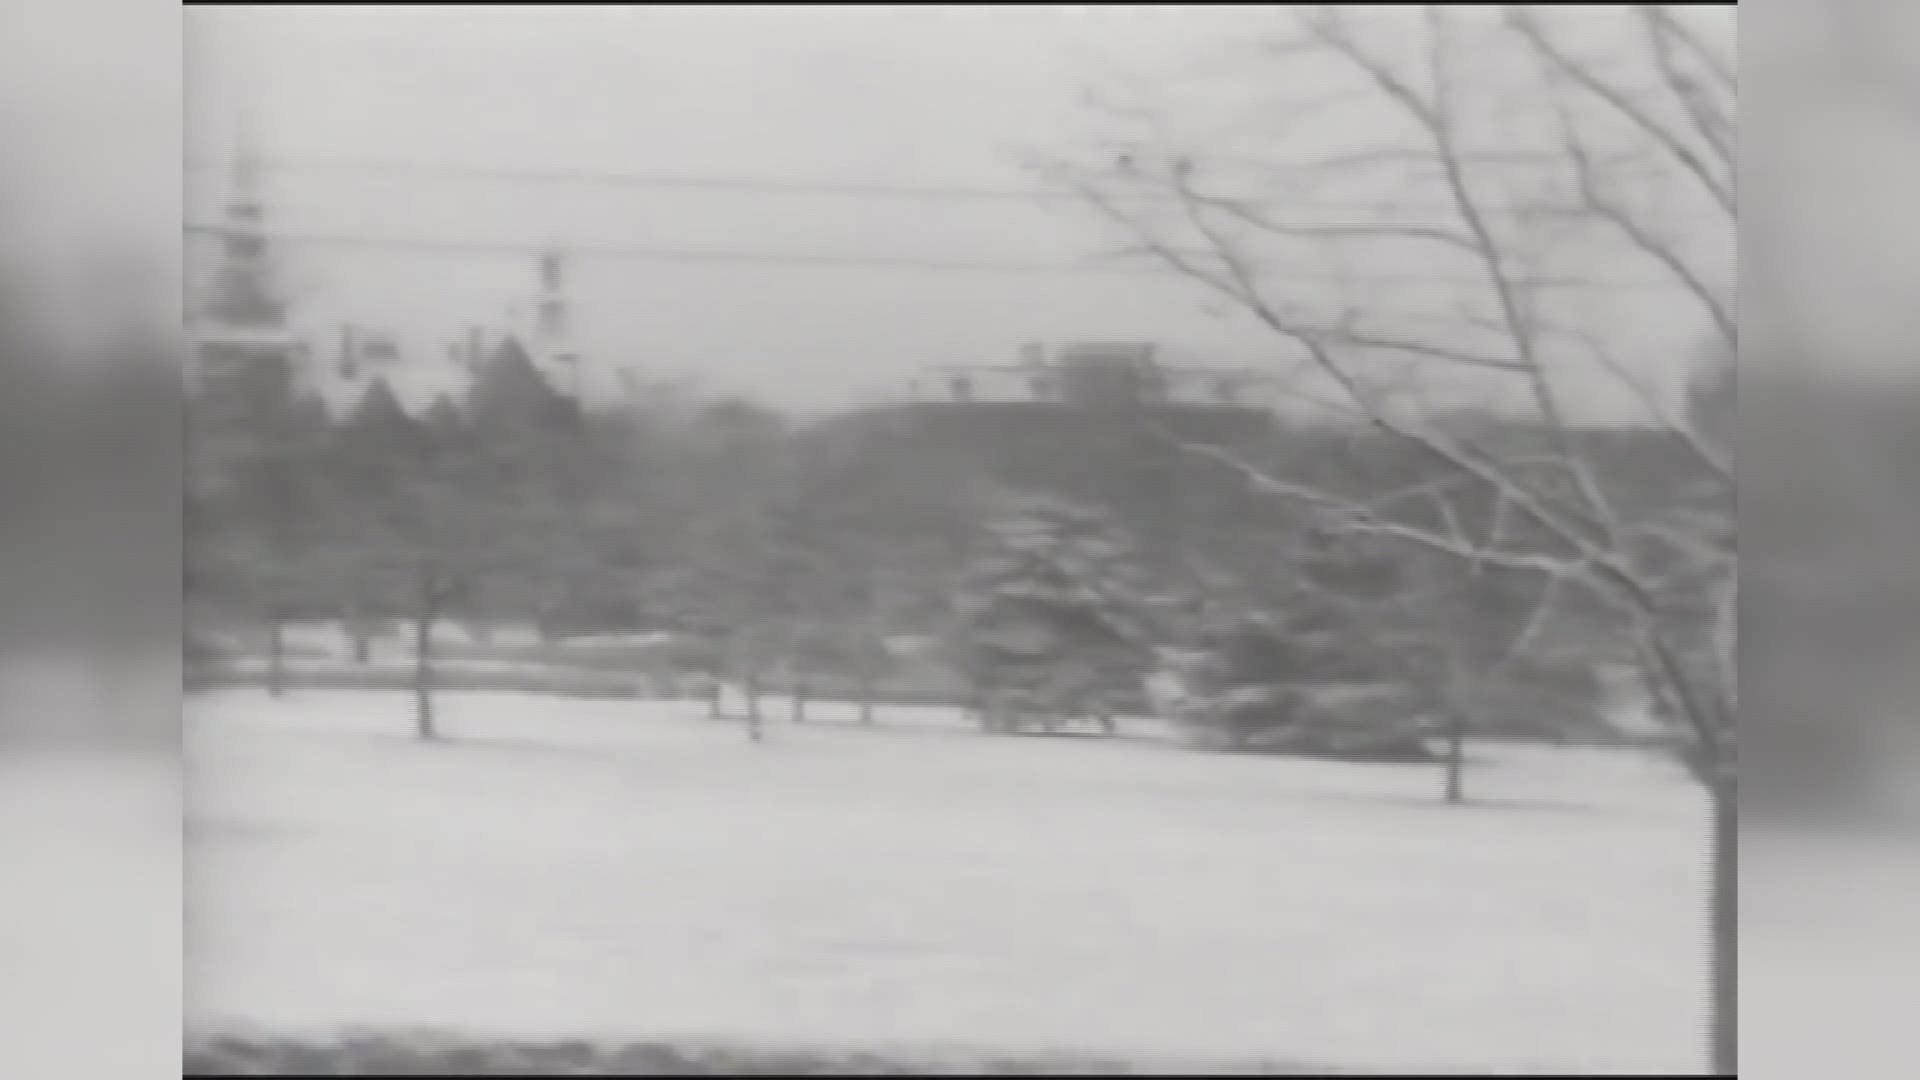 In the winter of 1935, Macon got about an inch and a half of snow. Here's footage from the first-known video recording of snow falling in the city.